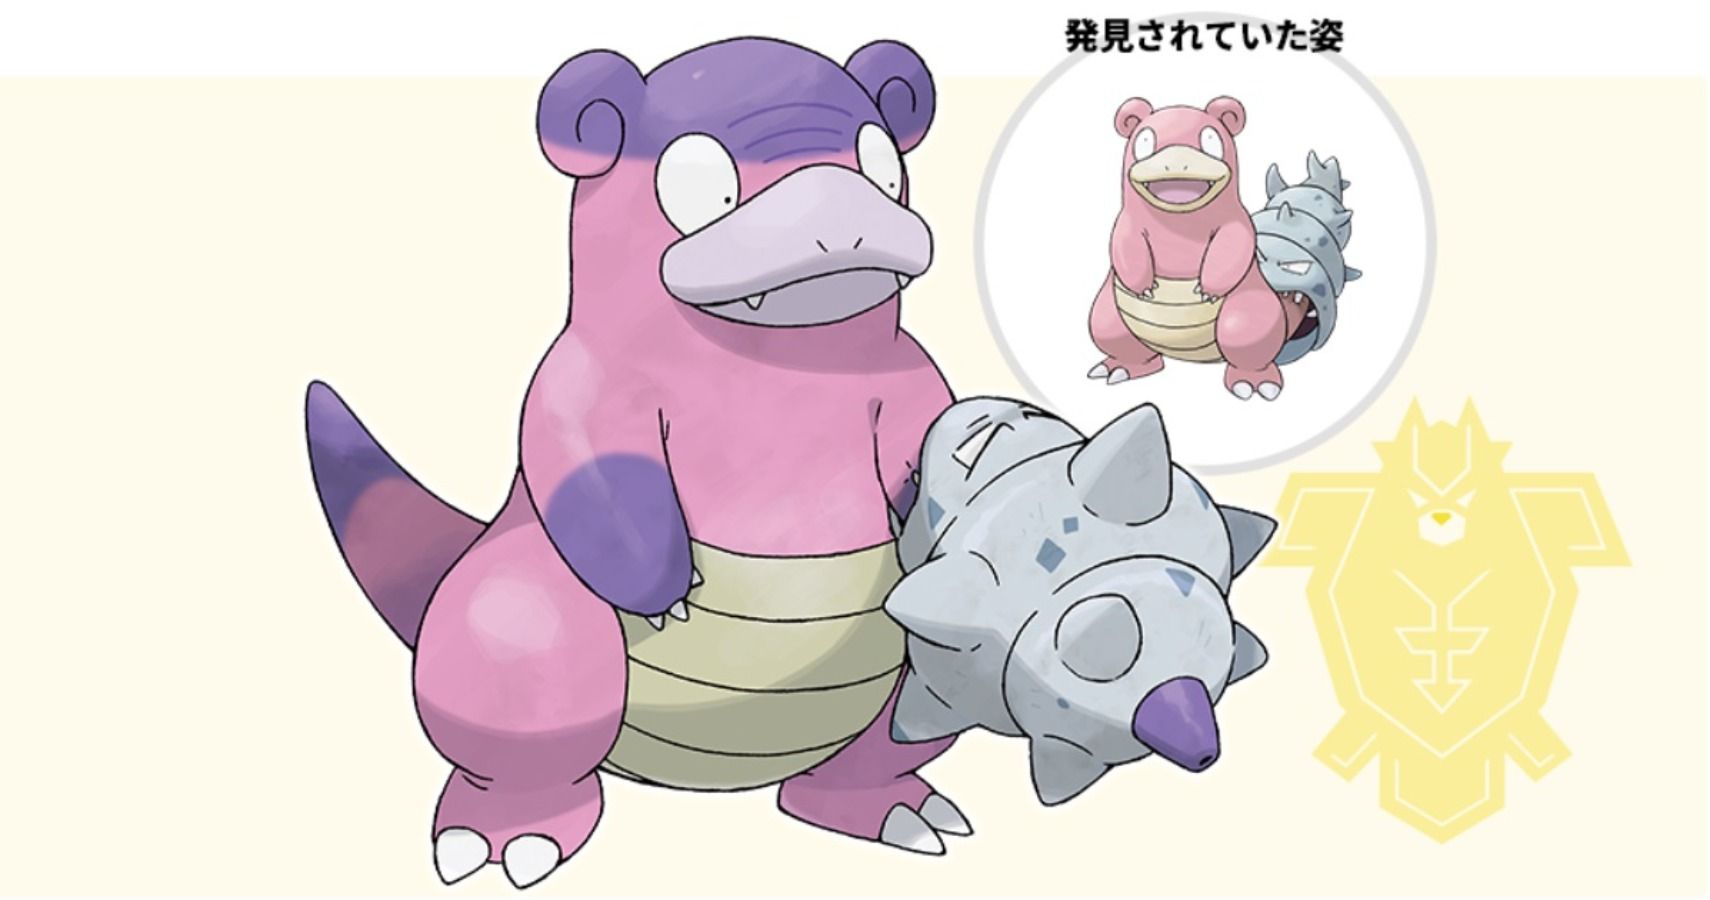 Galarian Slowbro Is A Poison Psychic Type Pokemon That Is Filled With Itchy Rage